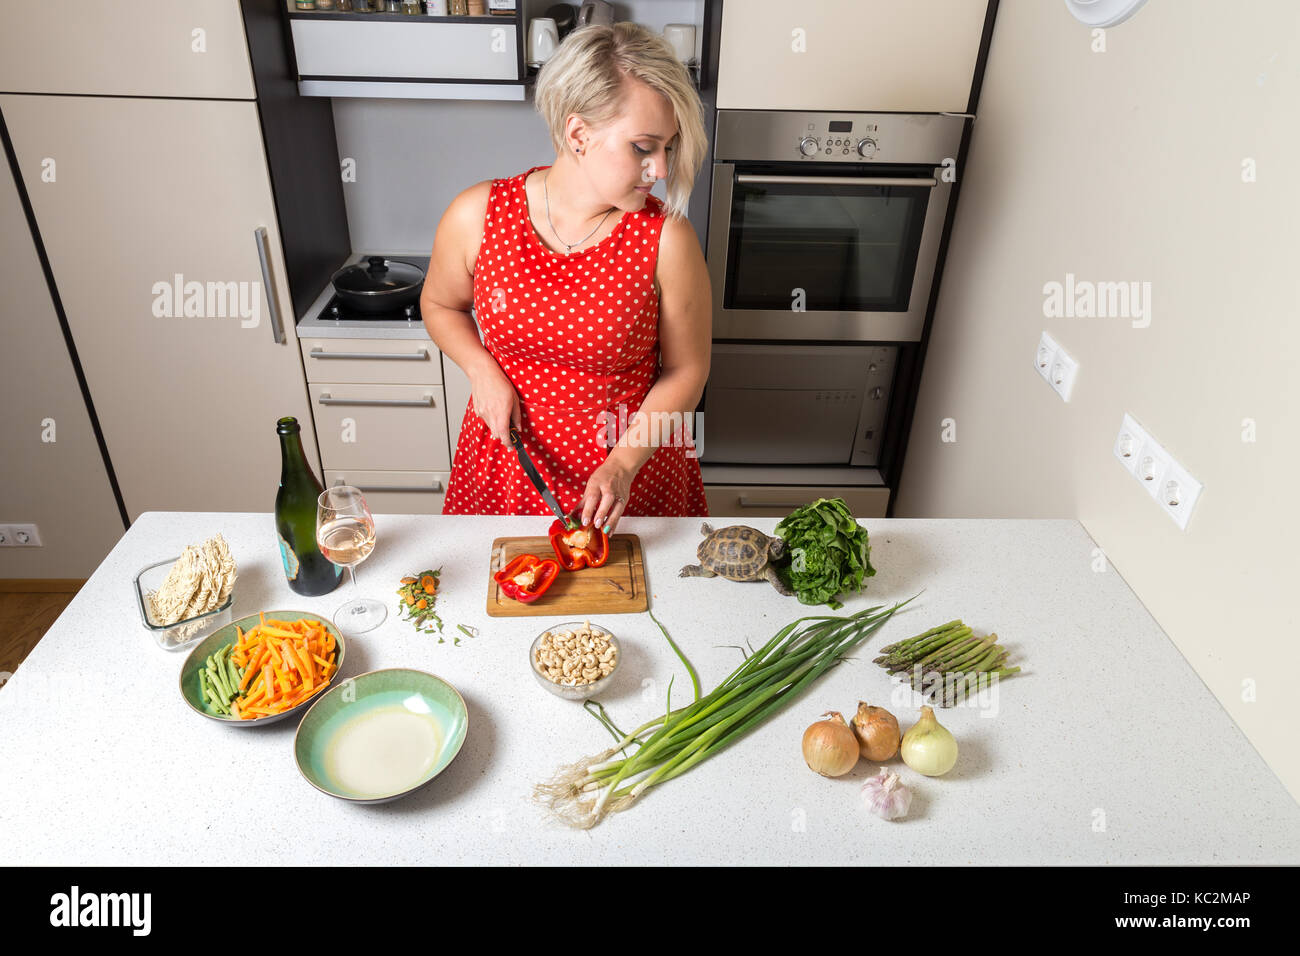 Woman cutting paprika and looking over shoulder of tortoise eating salad Stock Photo